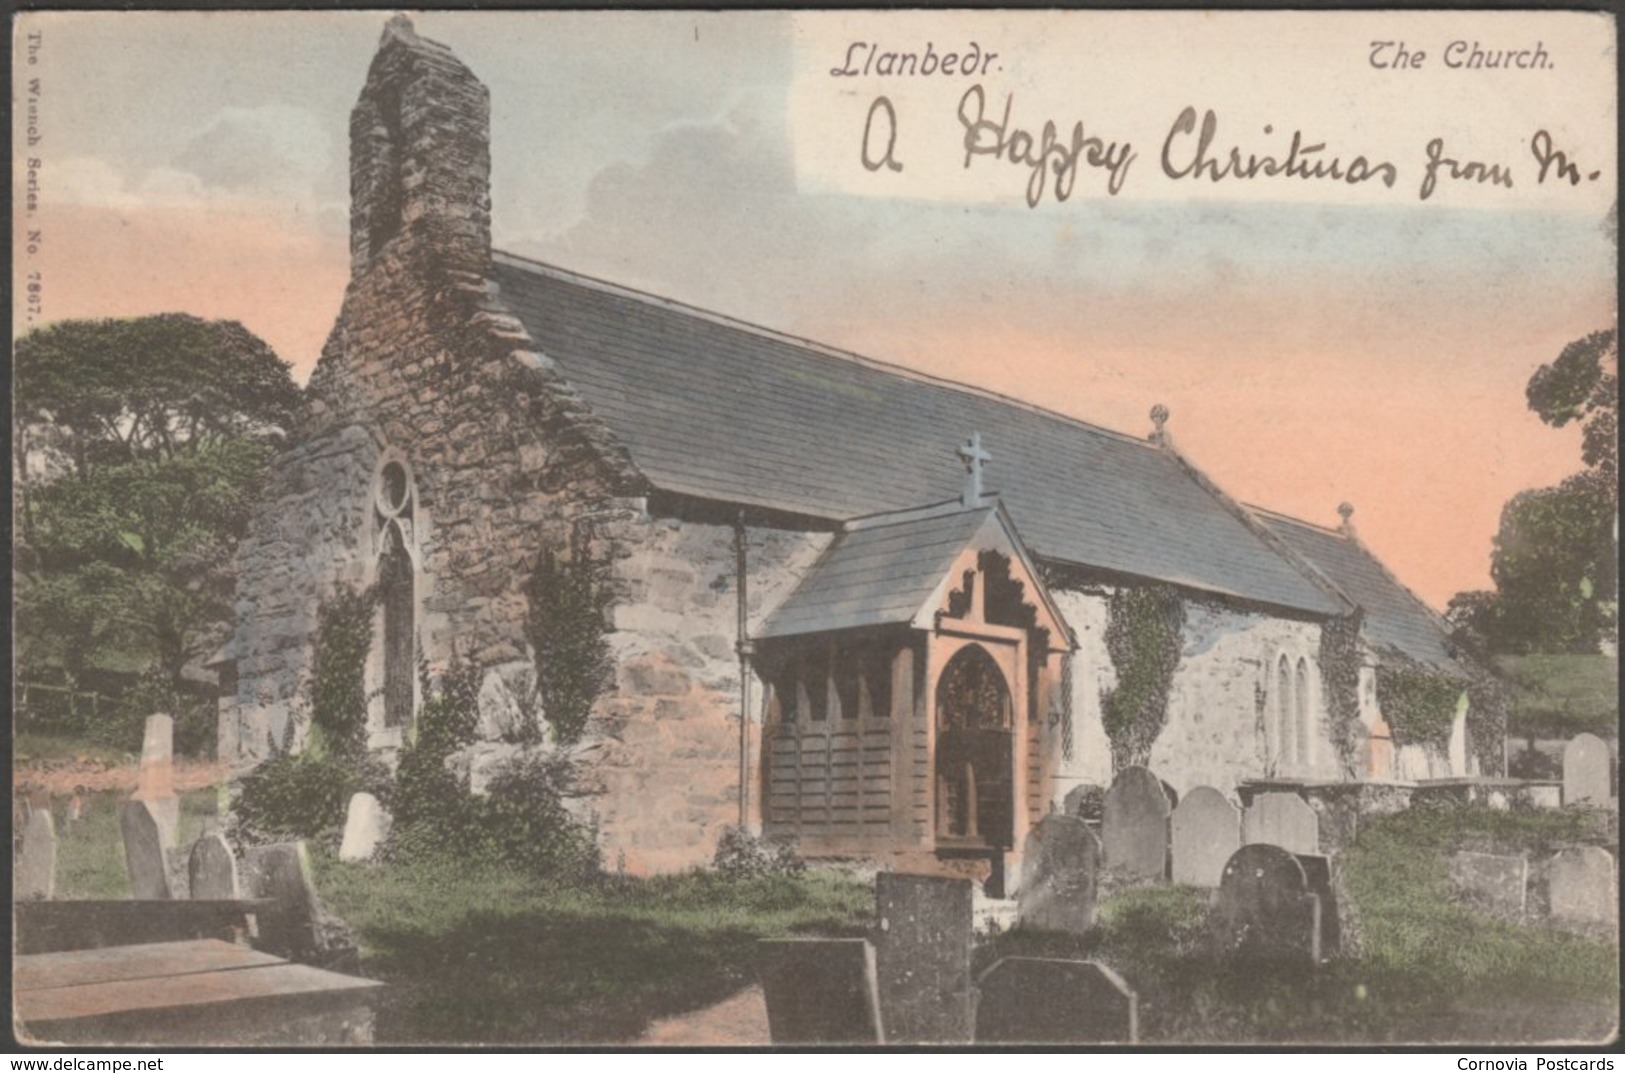 The Church, Llanbedr, Merionethshire, C.1905 - Wrench Postcard - Merionethshire